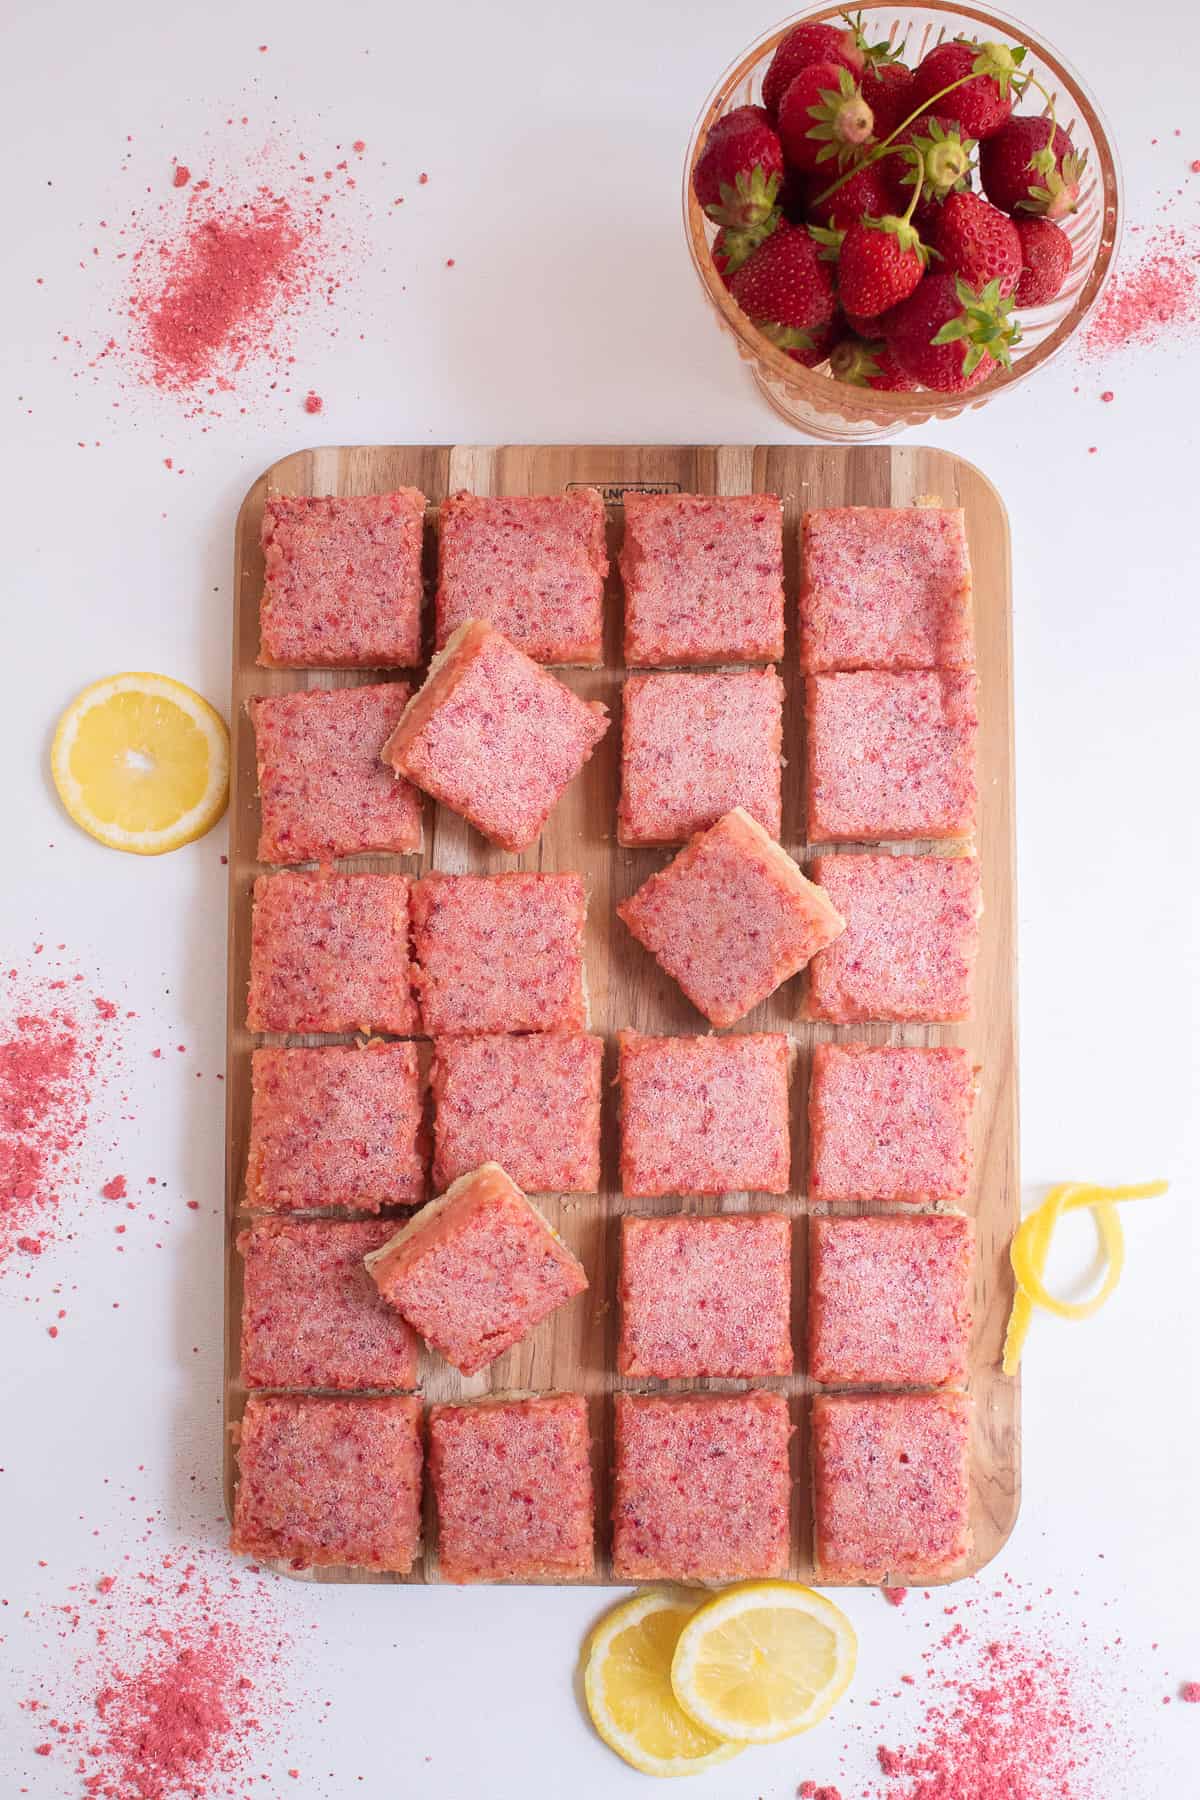 The strawberry lemon bars are on a wooden cutting board ans are surrounded by fresh strawberries, lemon slices, and strawberry powder.